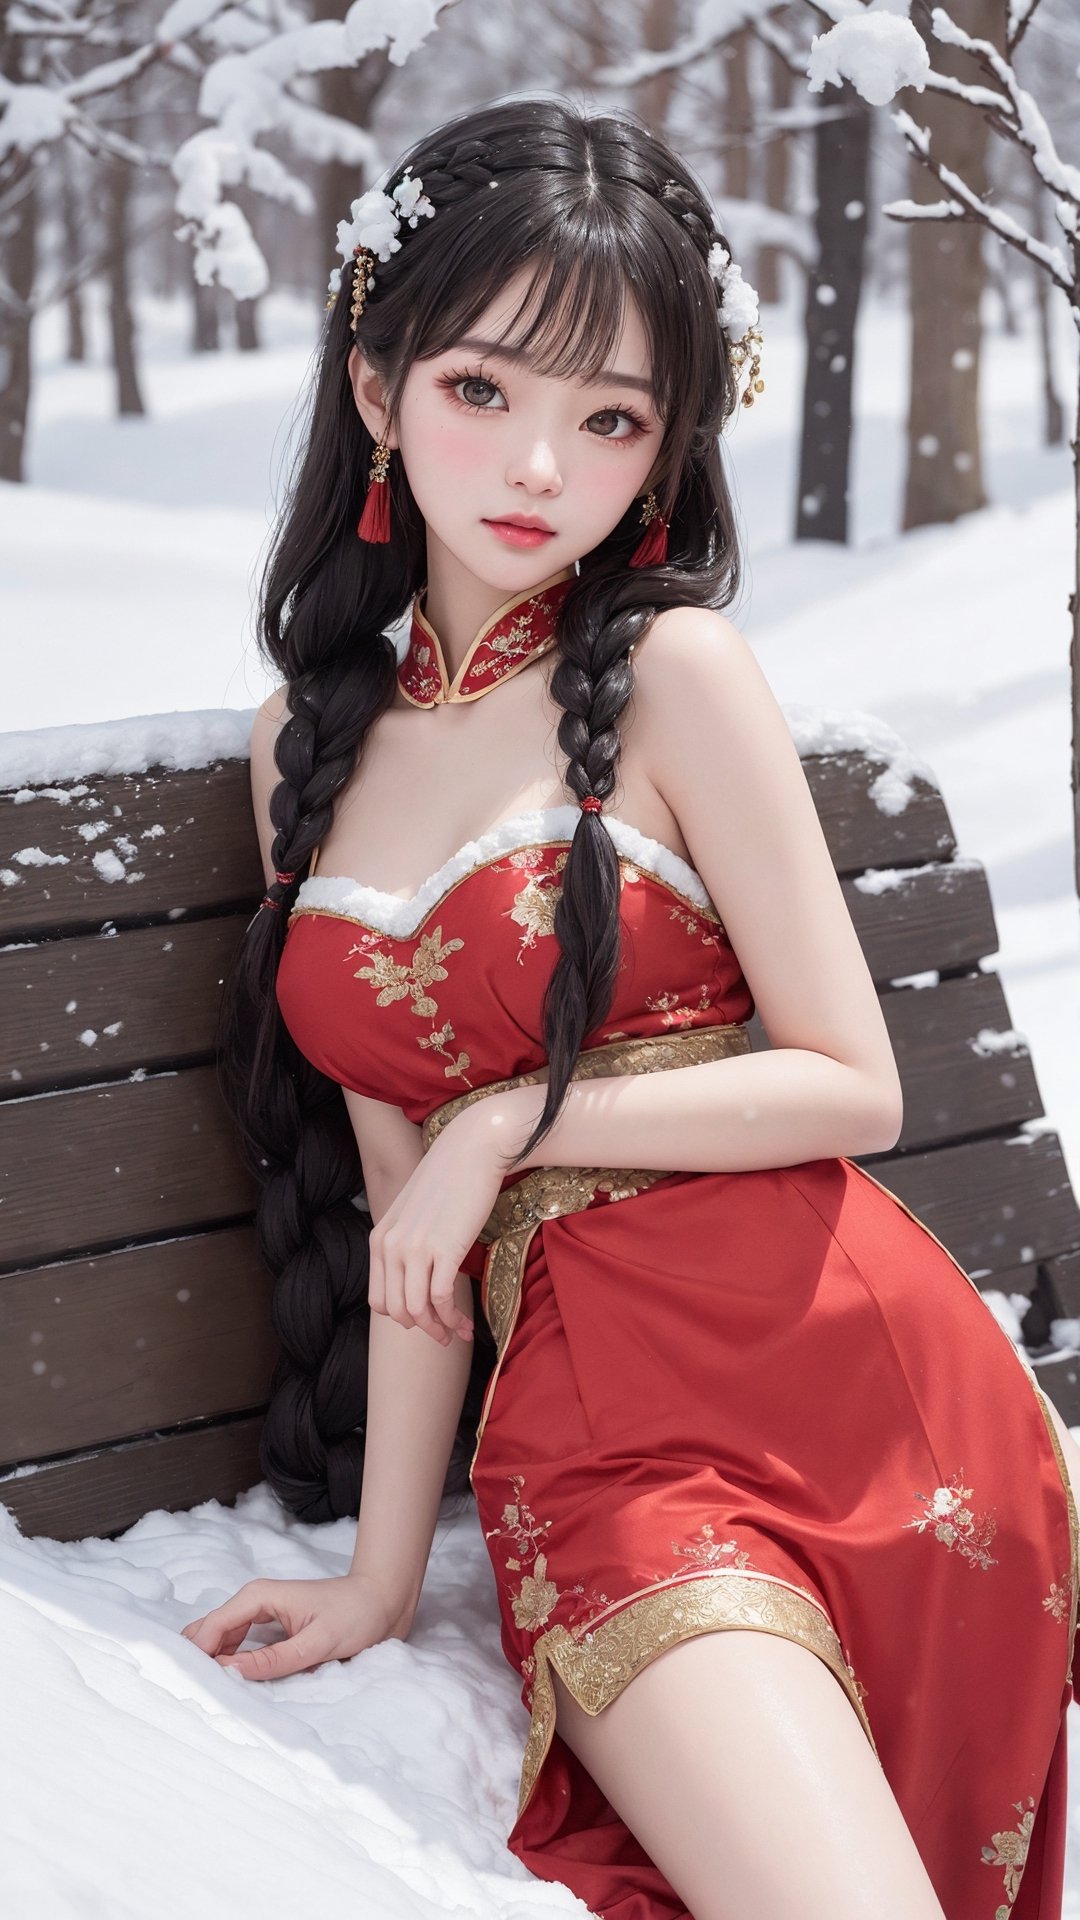 Jiaying, two graceful braids, bright black eyes, wearing a red traditional oriental costume with a black bel, fit
, cute, mysterious
, lying on back, looking at viewer
, (shallow depth of field photography, snow background)
, (perfect fingers:1.1)